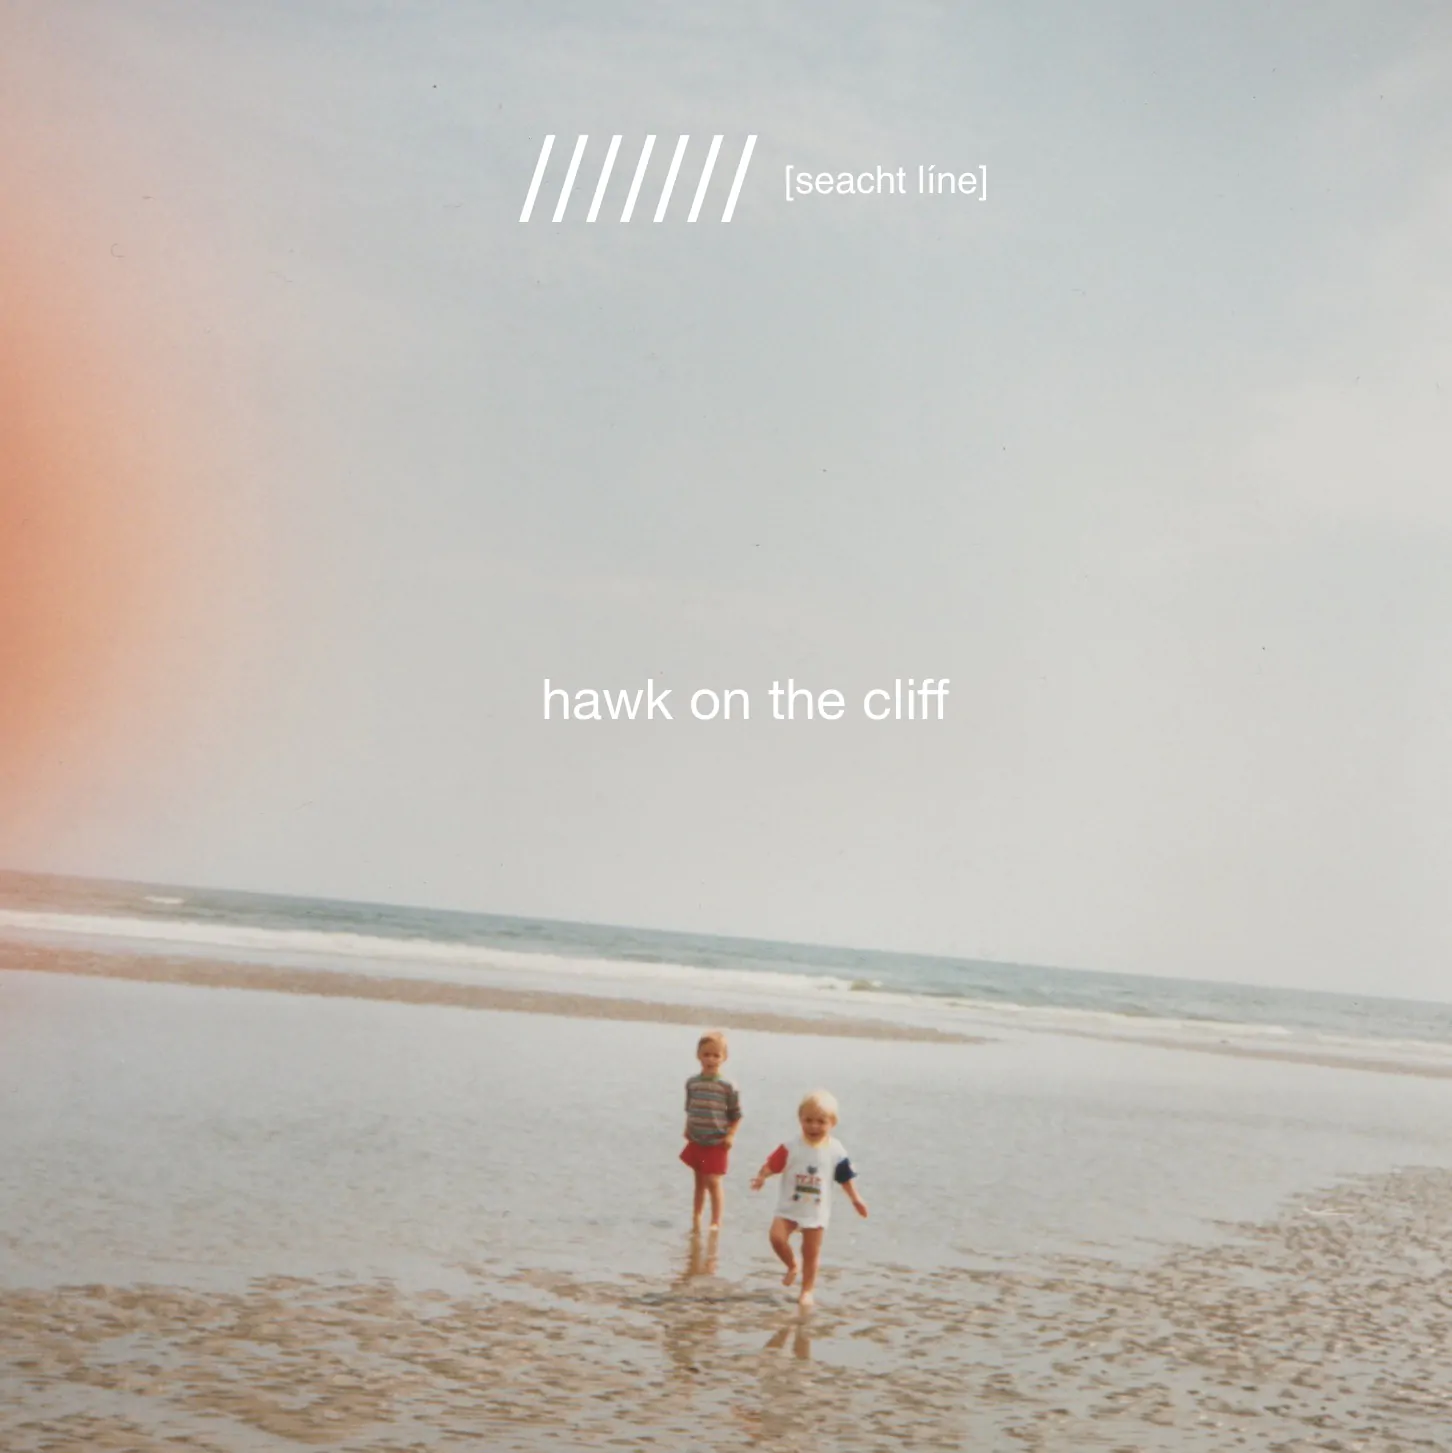 Listen to ‘Hawk On The Cliff’ from Joshua & Connor Burnside’s new project /////// [seacht líne]